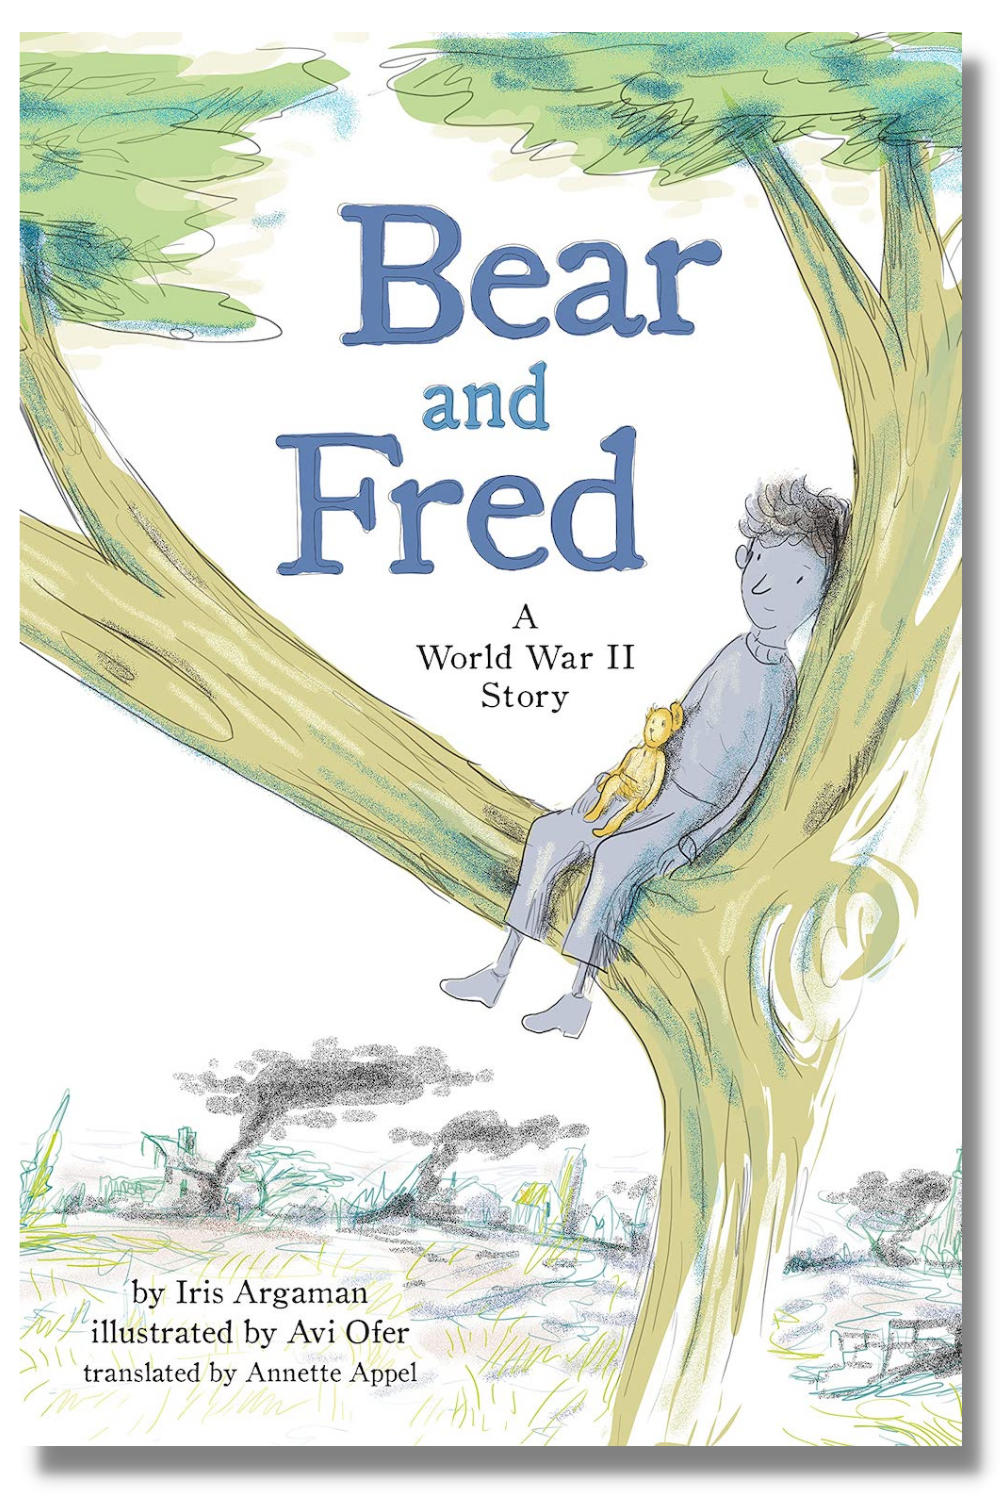 The cover of "Bear and Fred"